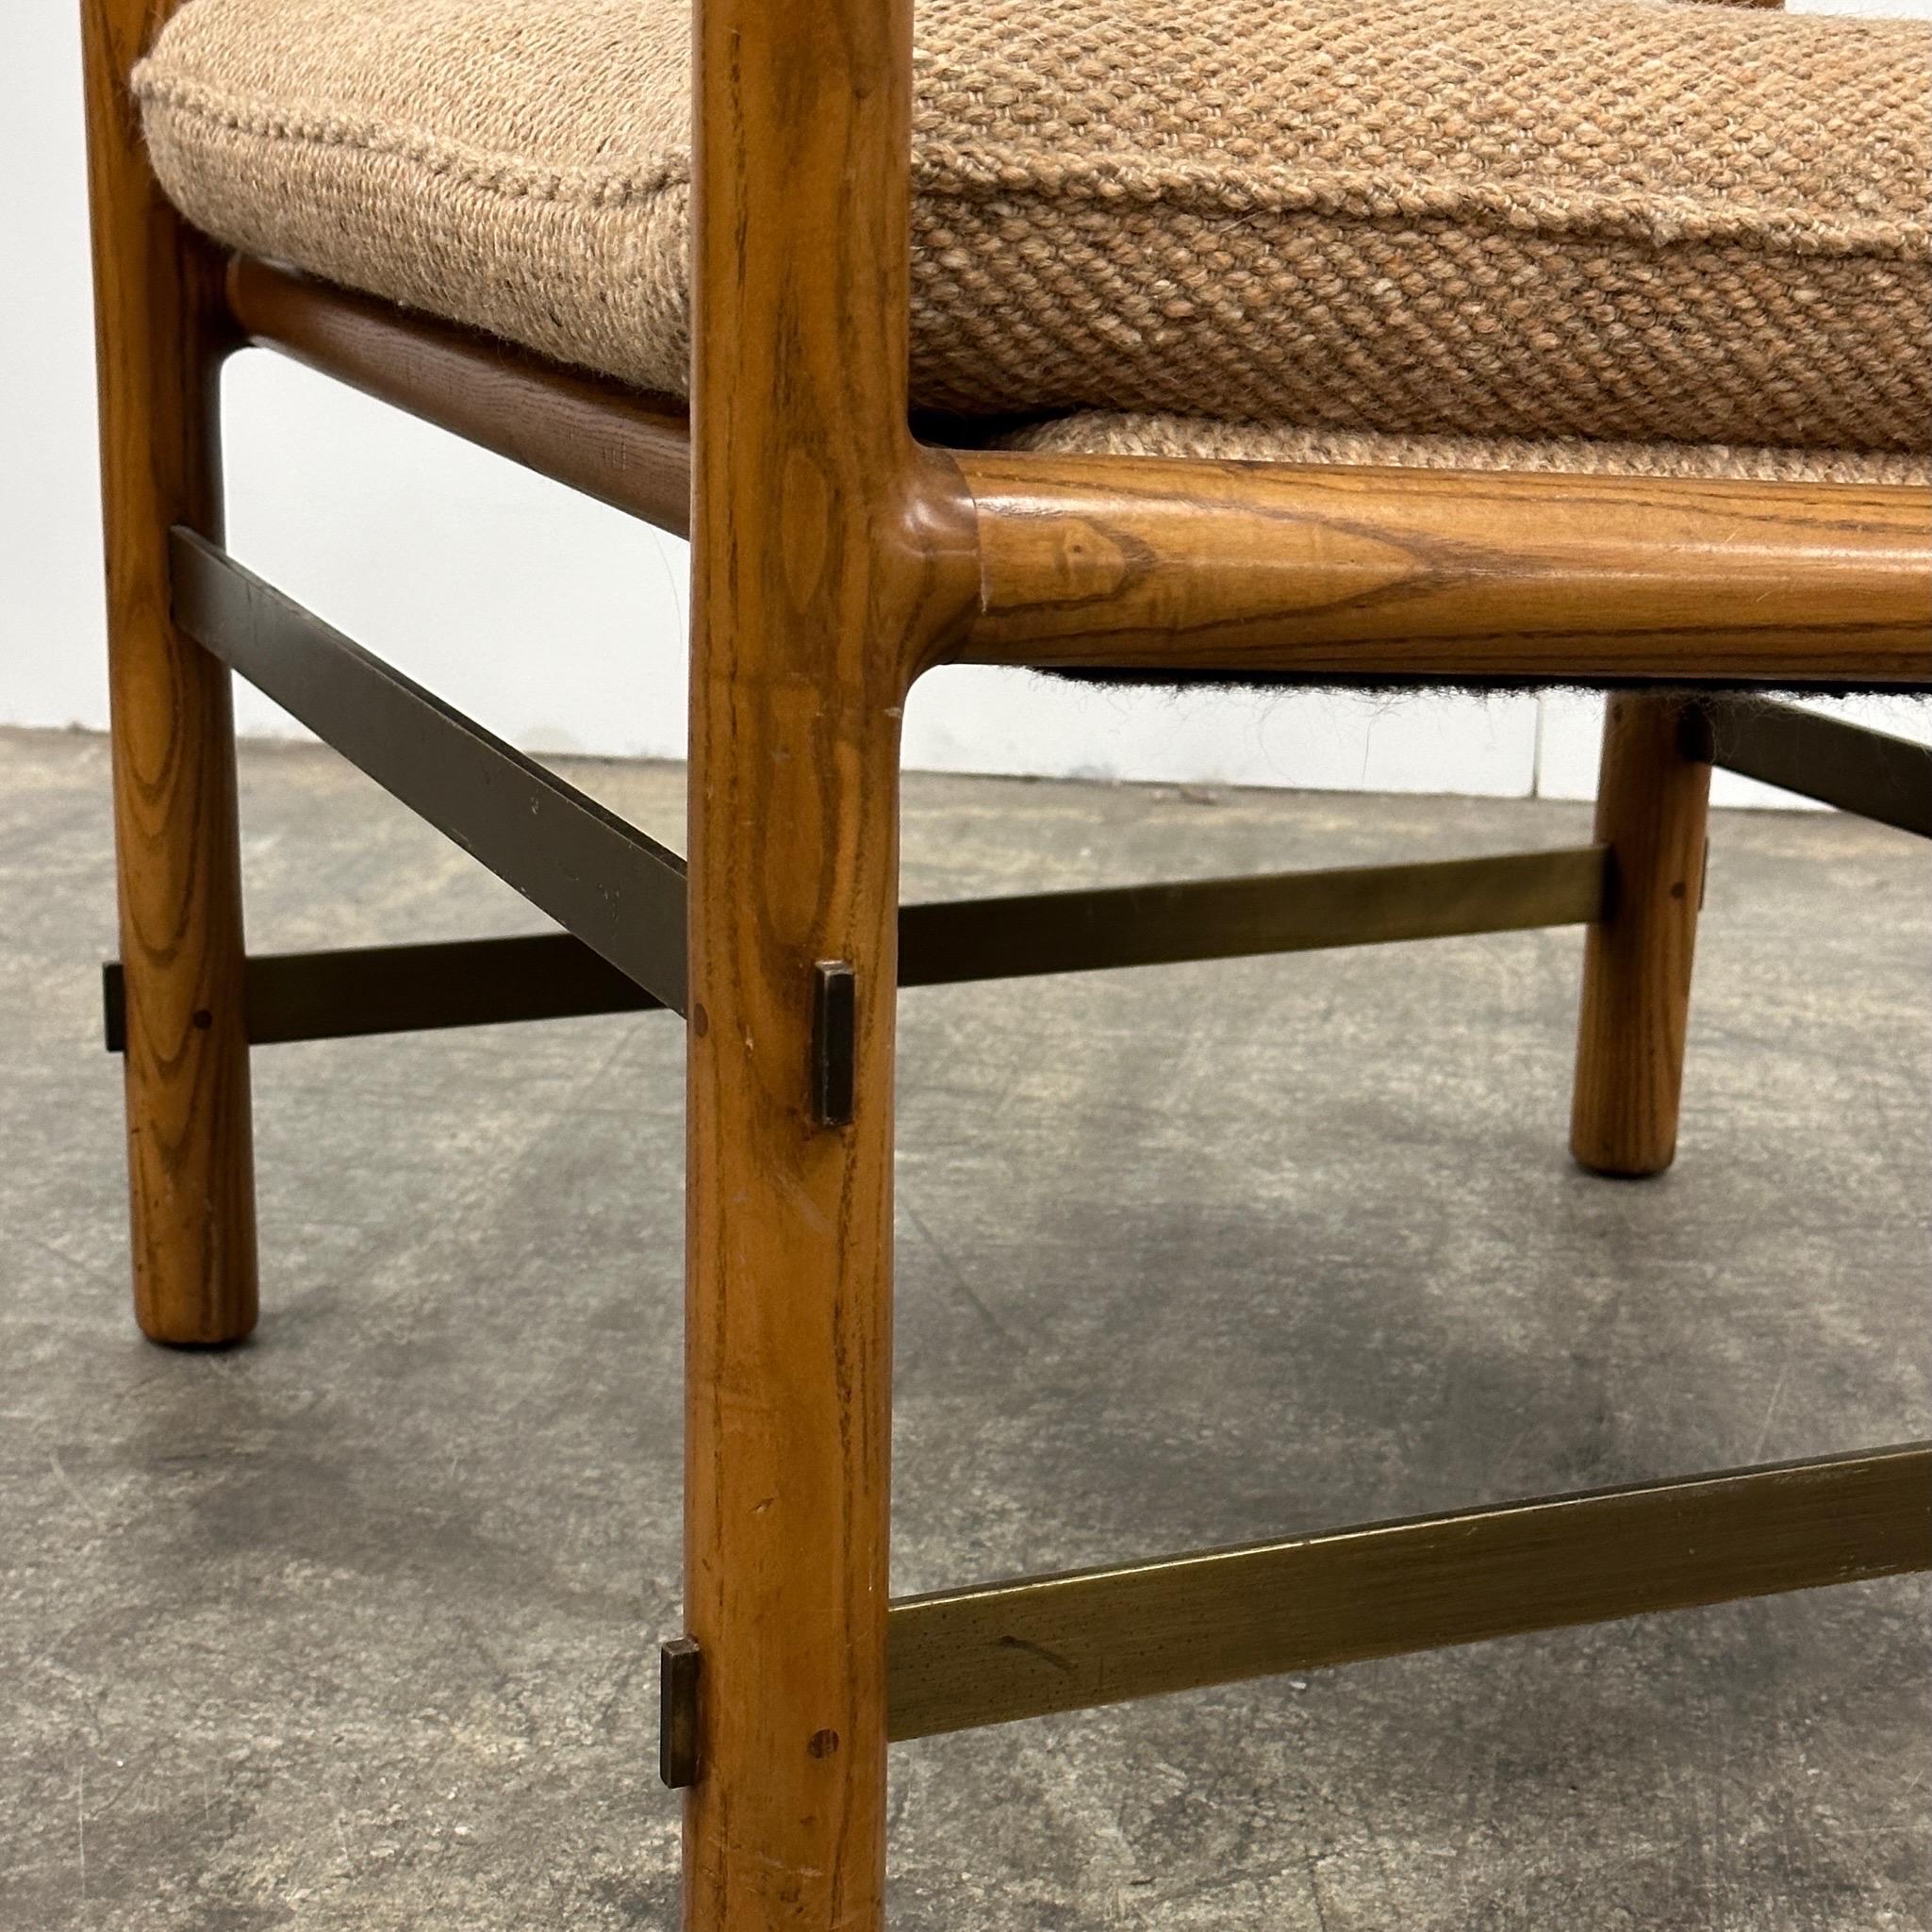 c. 1970s. Ash frame with original wool upholstery. Brass bars on legs. Tagged.